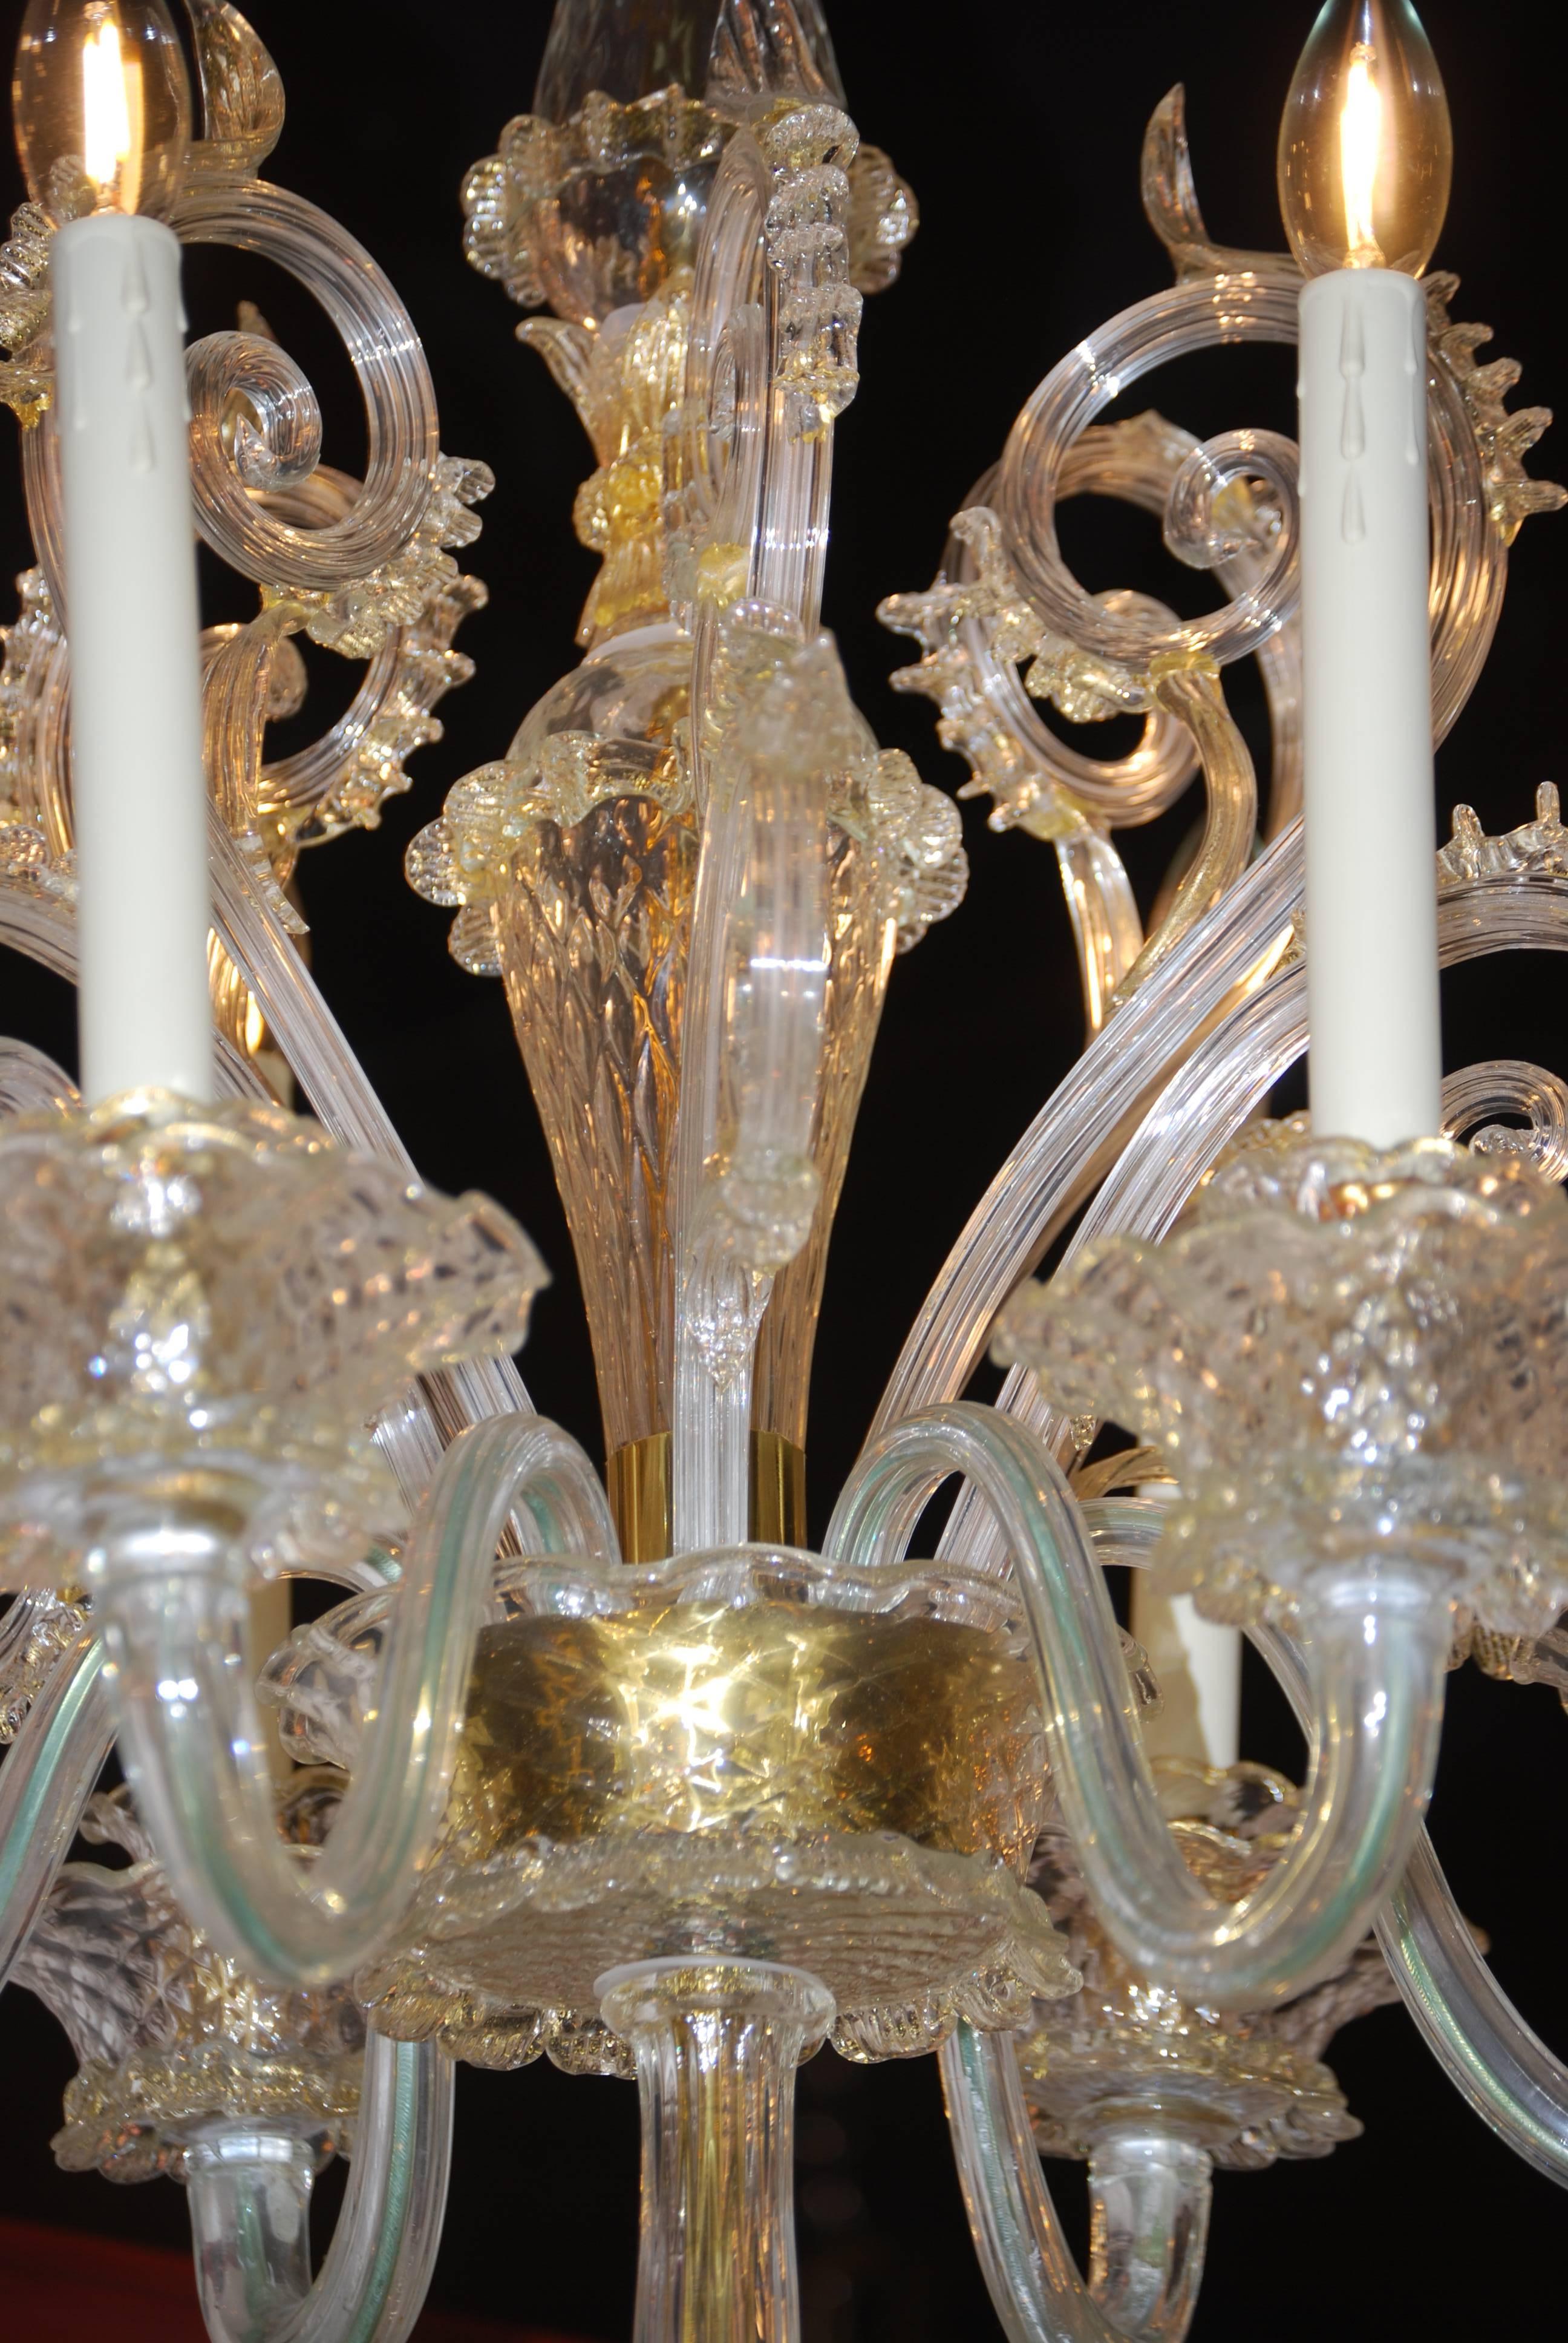 Blown Glass Pair of Murano Chandeliers  Late 19th Century  with 24-Karat Gold Decoration For Sale